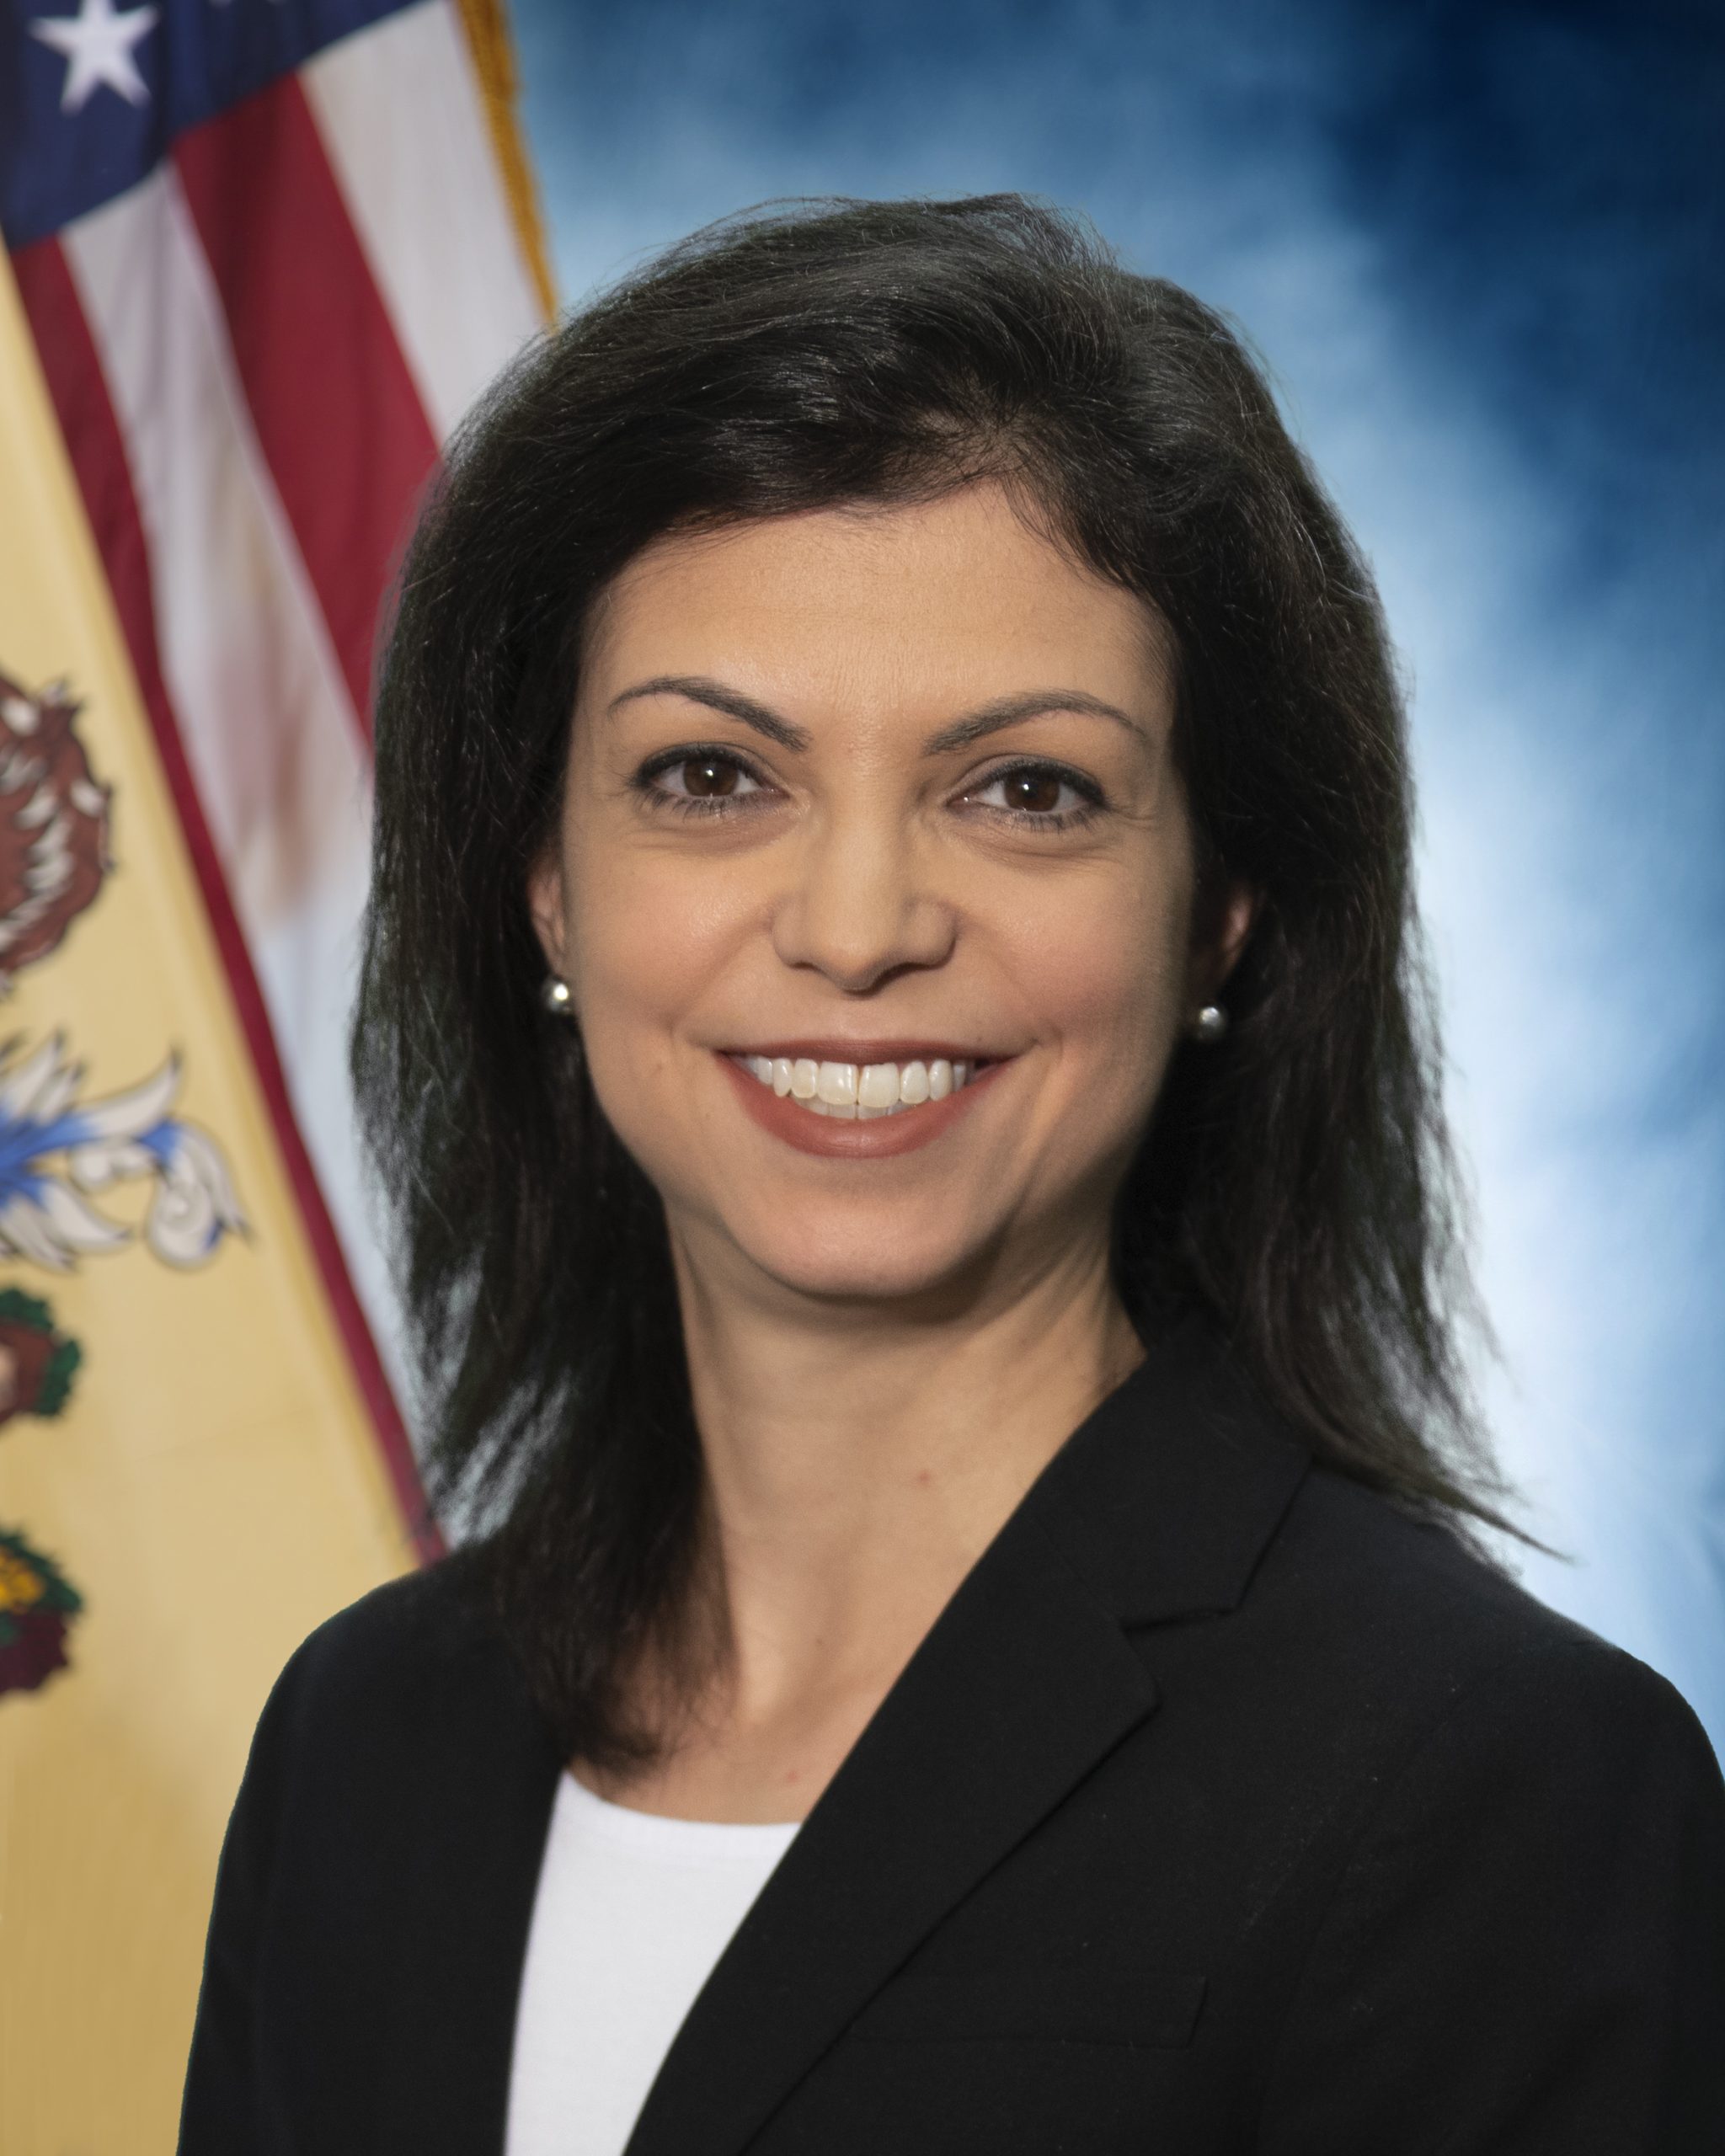 </p>
<h3 style="color:white;">Sara Ben-David</h3>
<h5 style="color:white;font-style:italic;">Counsel to the Attorney General</h5>
<p>